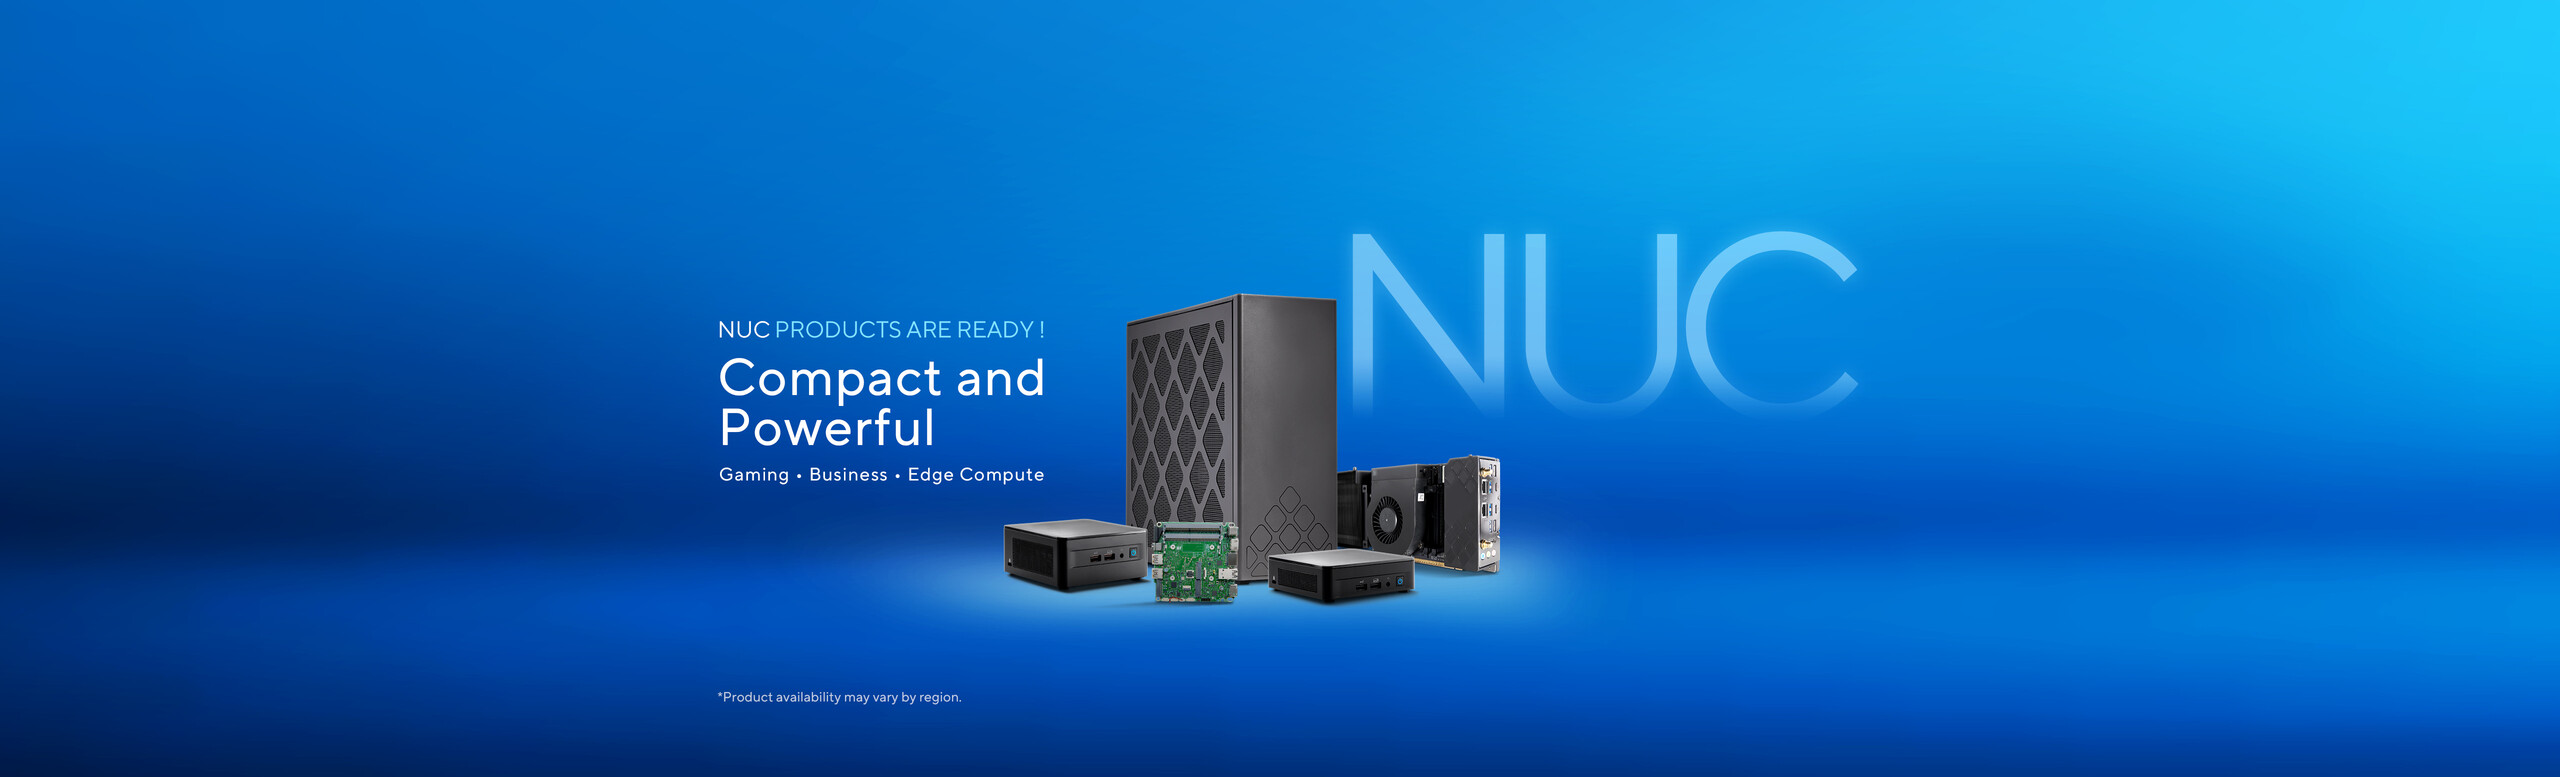 NUC overview